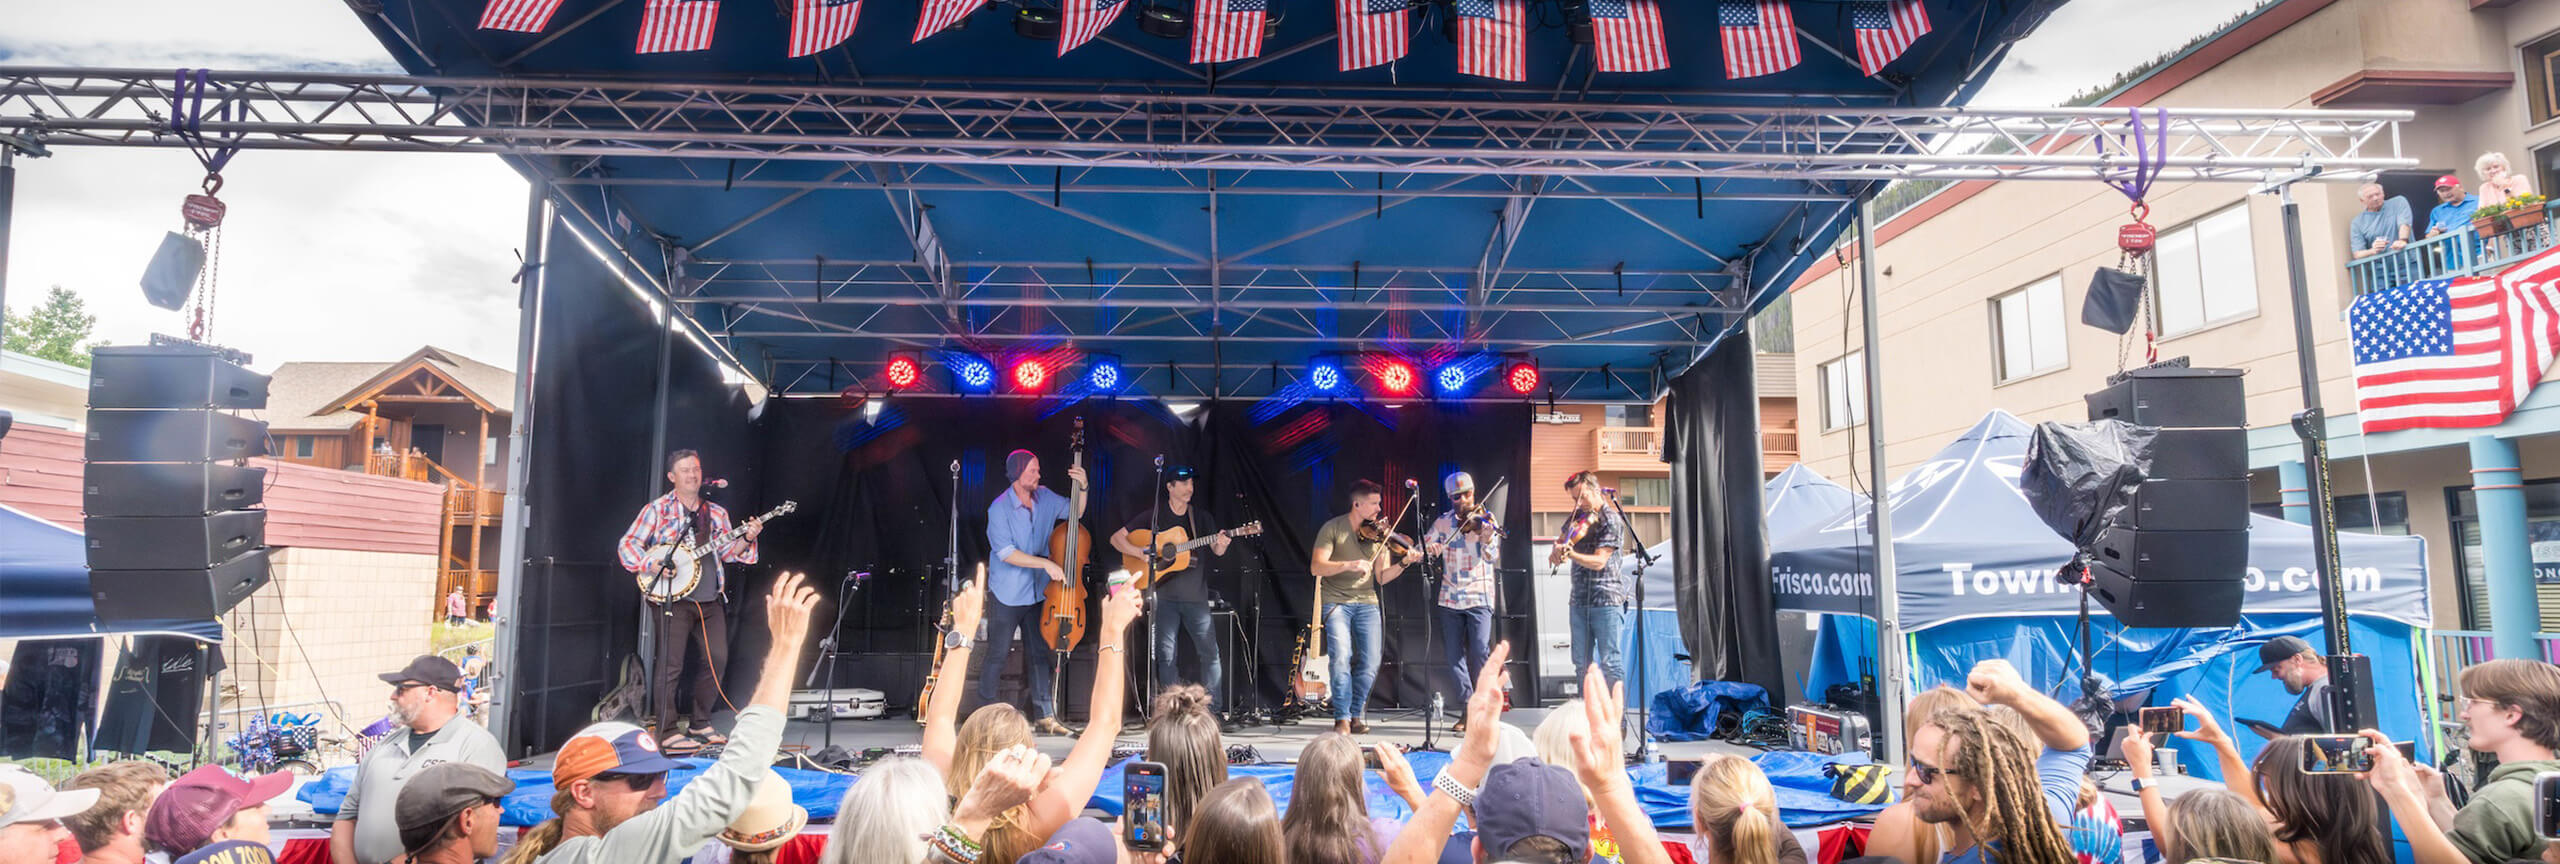 Yonder Mountain String Band on stage at 4th of July concert